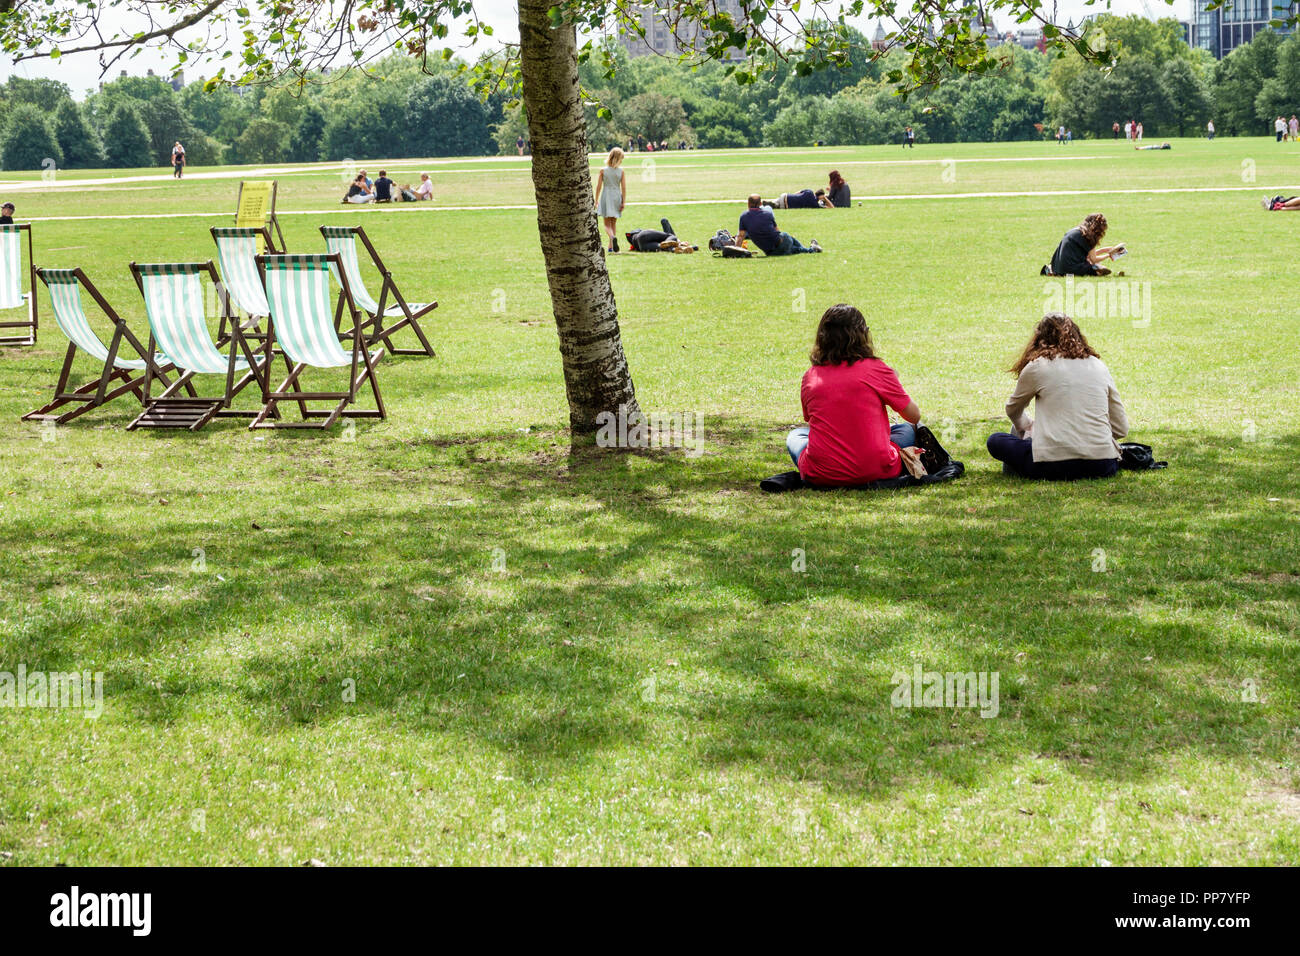 London England,UK,Hyde Park,historic Royal Park,field lawn,parade ground,rental deck chairs,shade tree,woman female women,sitting on grassy grass,UK G Stock Photo